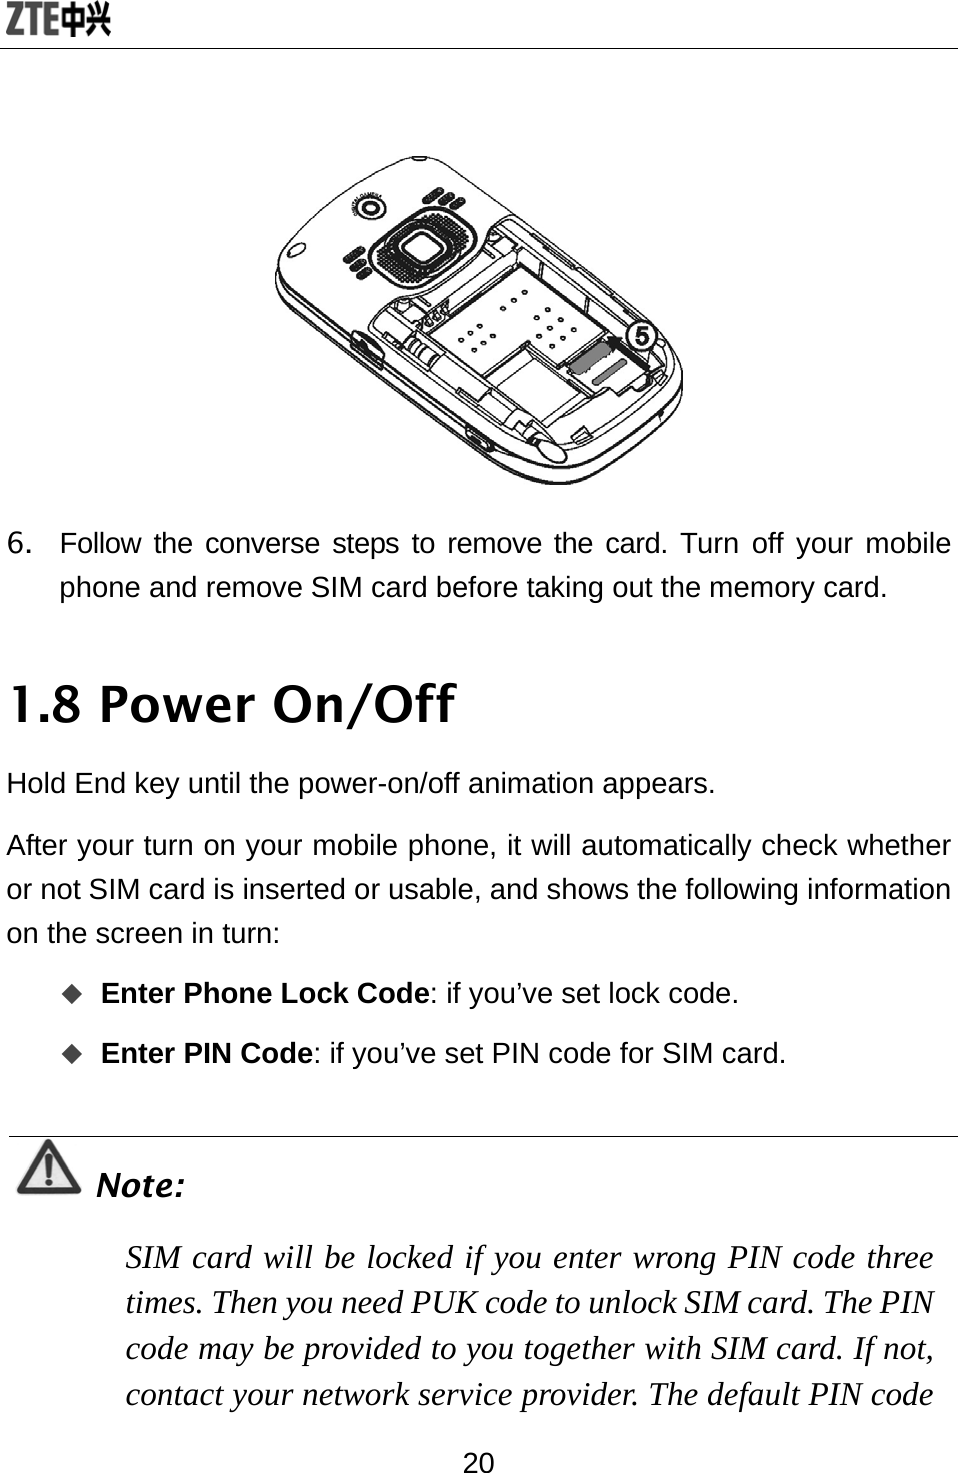  20  6.  Follow the converse steps to remove the card. Turn off your mobile phone and remove SIM card before taking out the memory card. 1.8 Power On/Off Hold End key until the power-on/off animation appears. After your turn on your mobile phone, it will automatically check whether or not SIM card is inserted or usable, and shows the following information on the screen in turn:  Enter Phone Lock Code: if you’ve set lock code.  Enter PIN Code: if you’ve set PIN code for SIM card.  Note: SIM card will be locked if you enter wrong PIN code three times. Then you need PUK code to unlock SIM card. The PIN code may be provided to you together with SIM card. If not, contact your network service provider. The default PIN code 